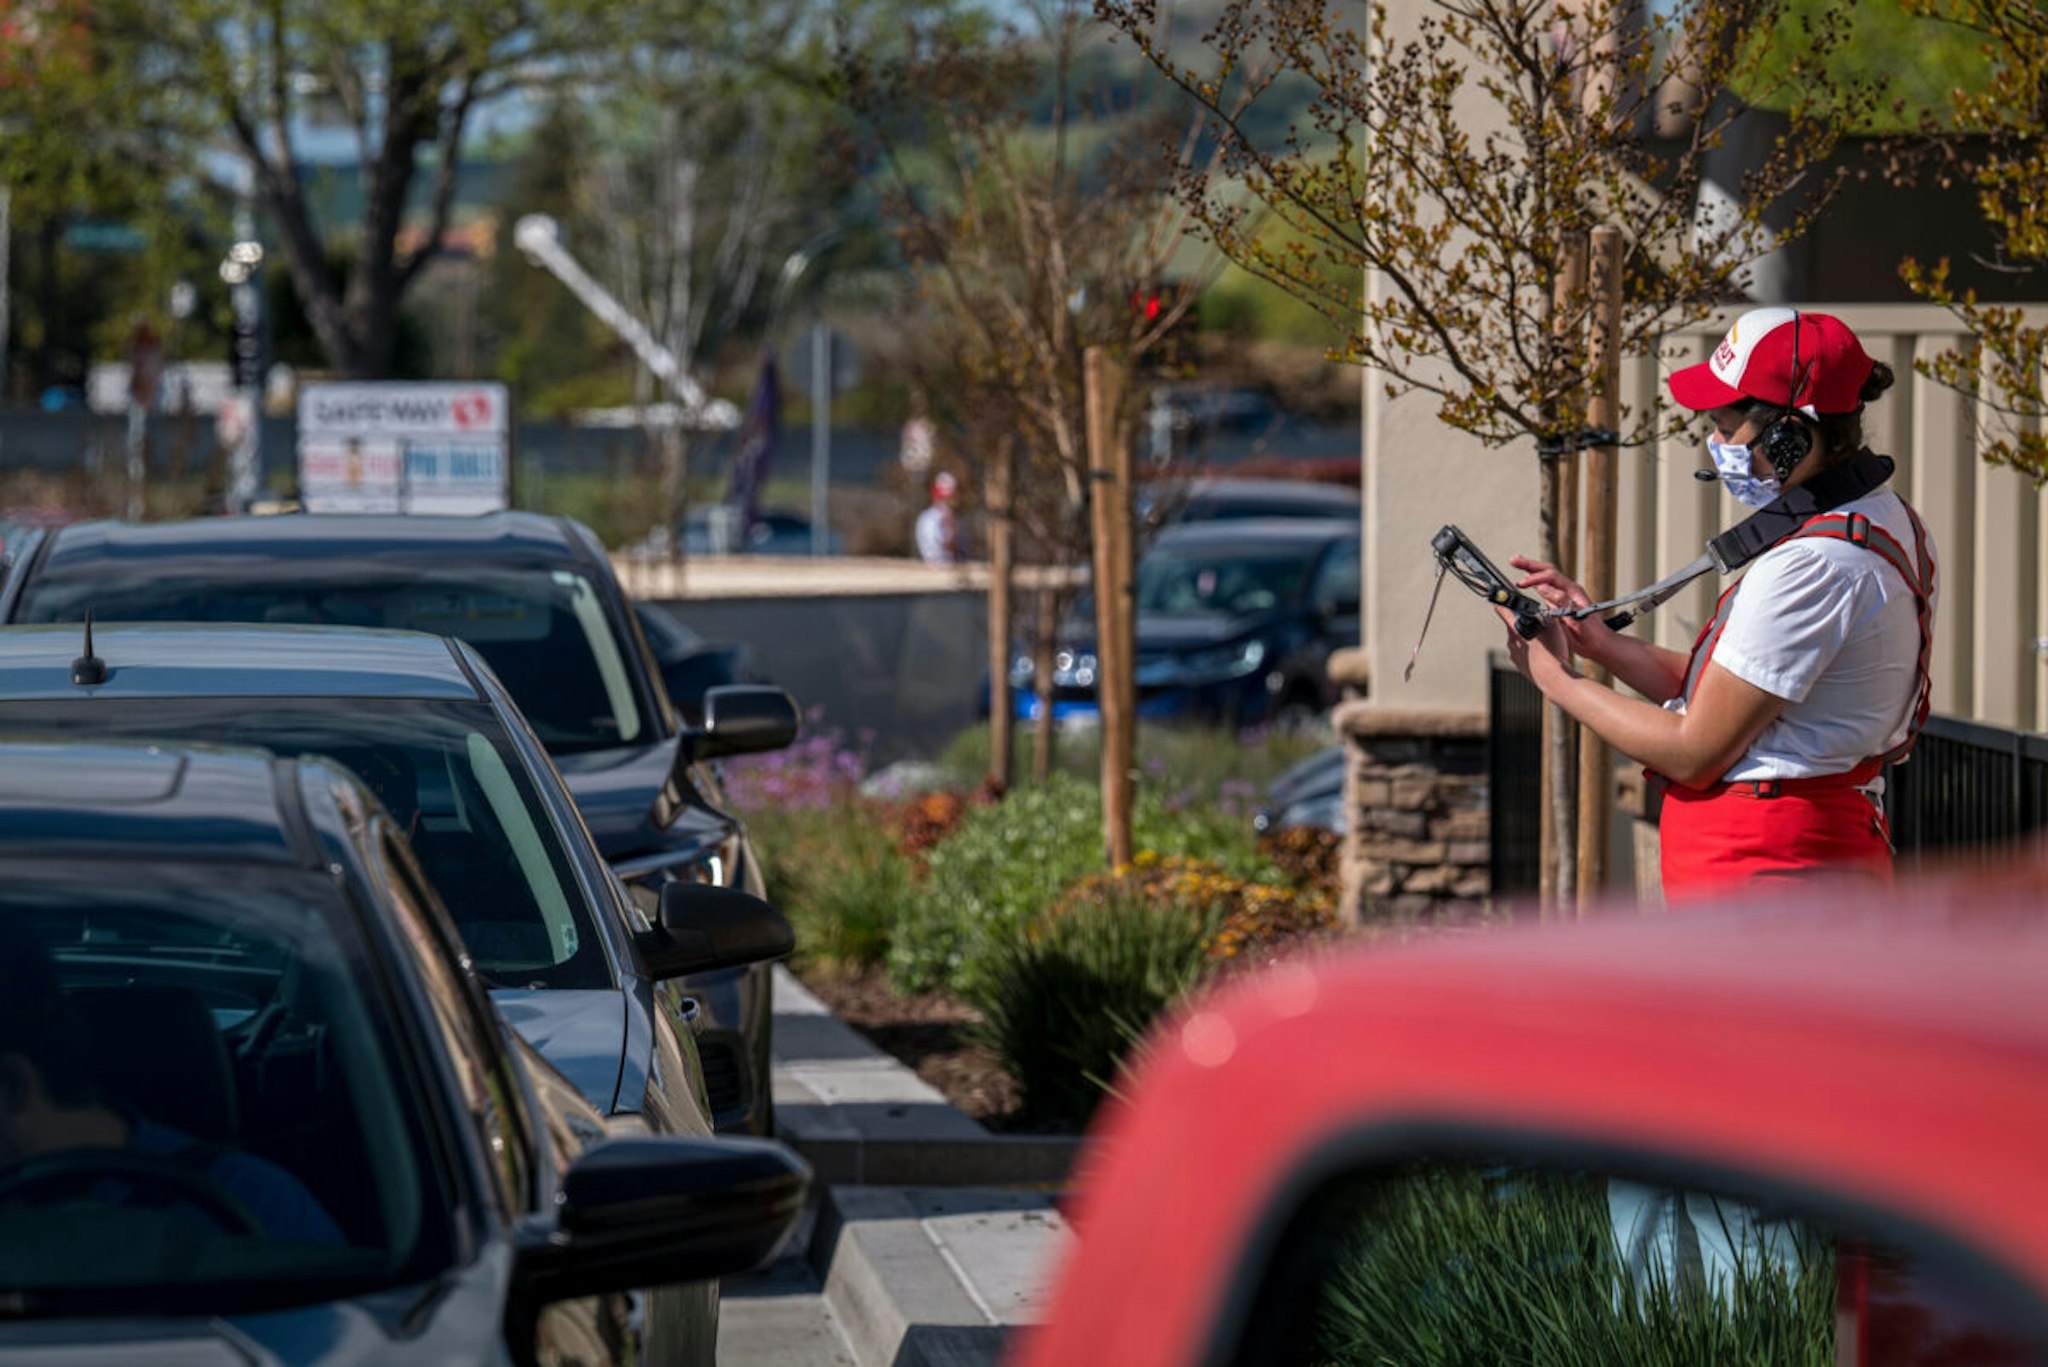 A worker wearing a cloth protective mask takes an order from a customer waiting in a drive-thru line at an In-N-Out Burgers restaurant in Vallejo, California, U.S., on Tuesday, April 7, 2020.